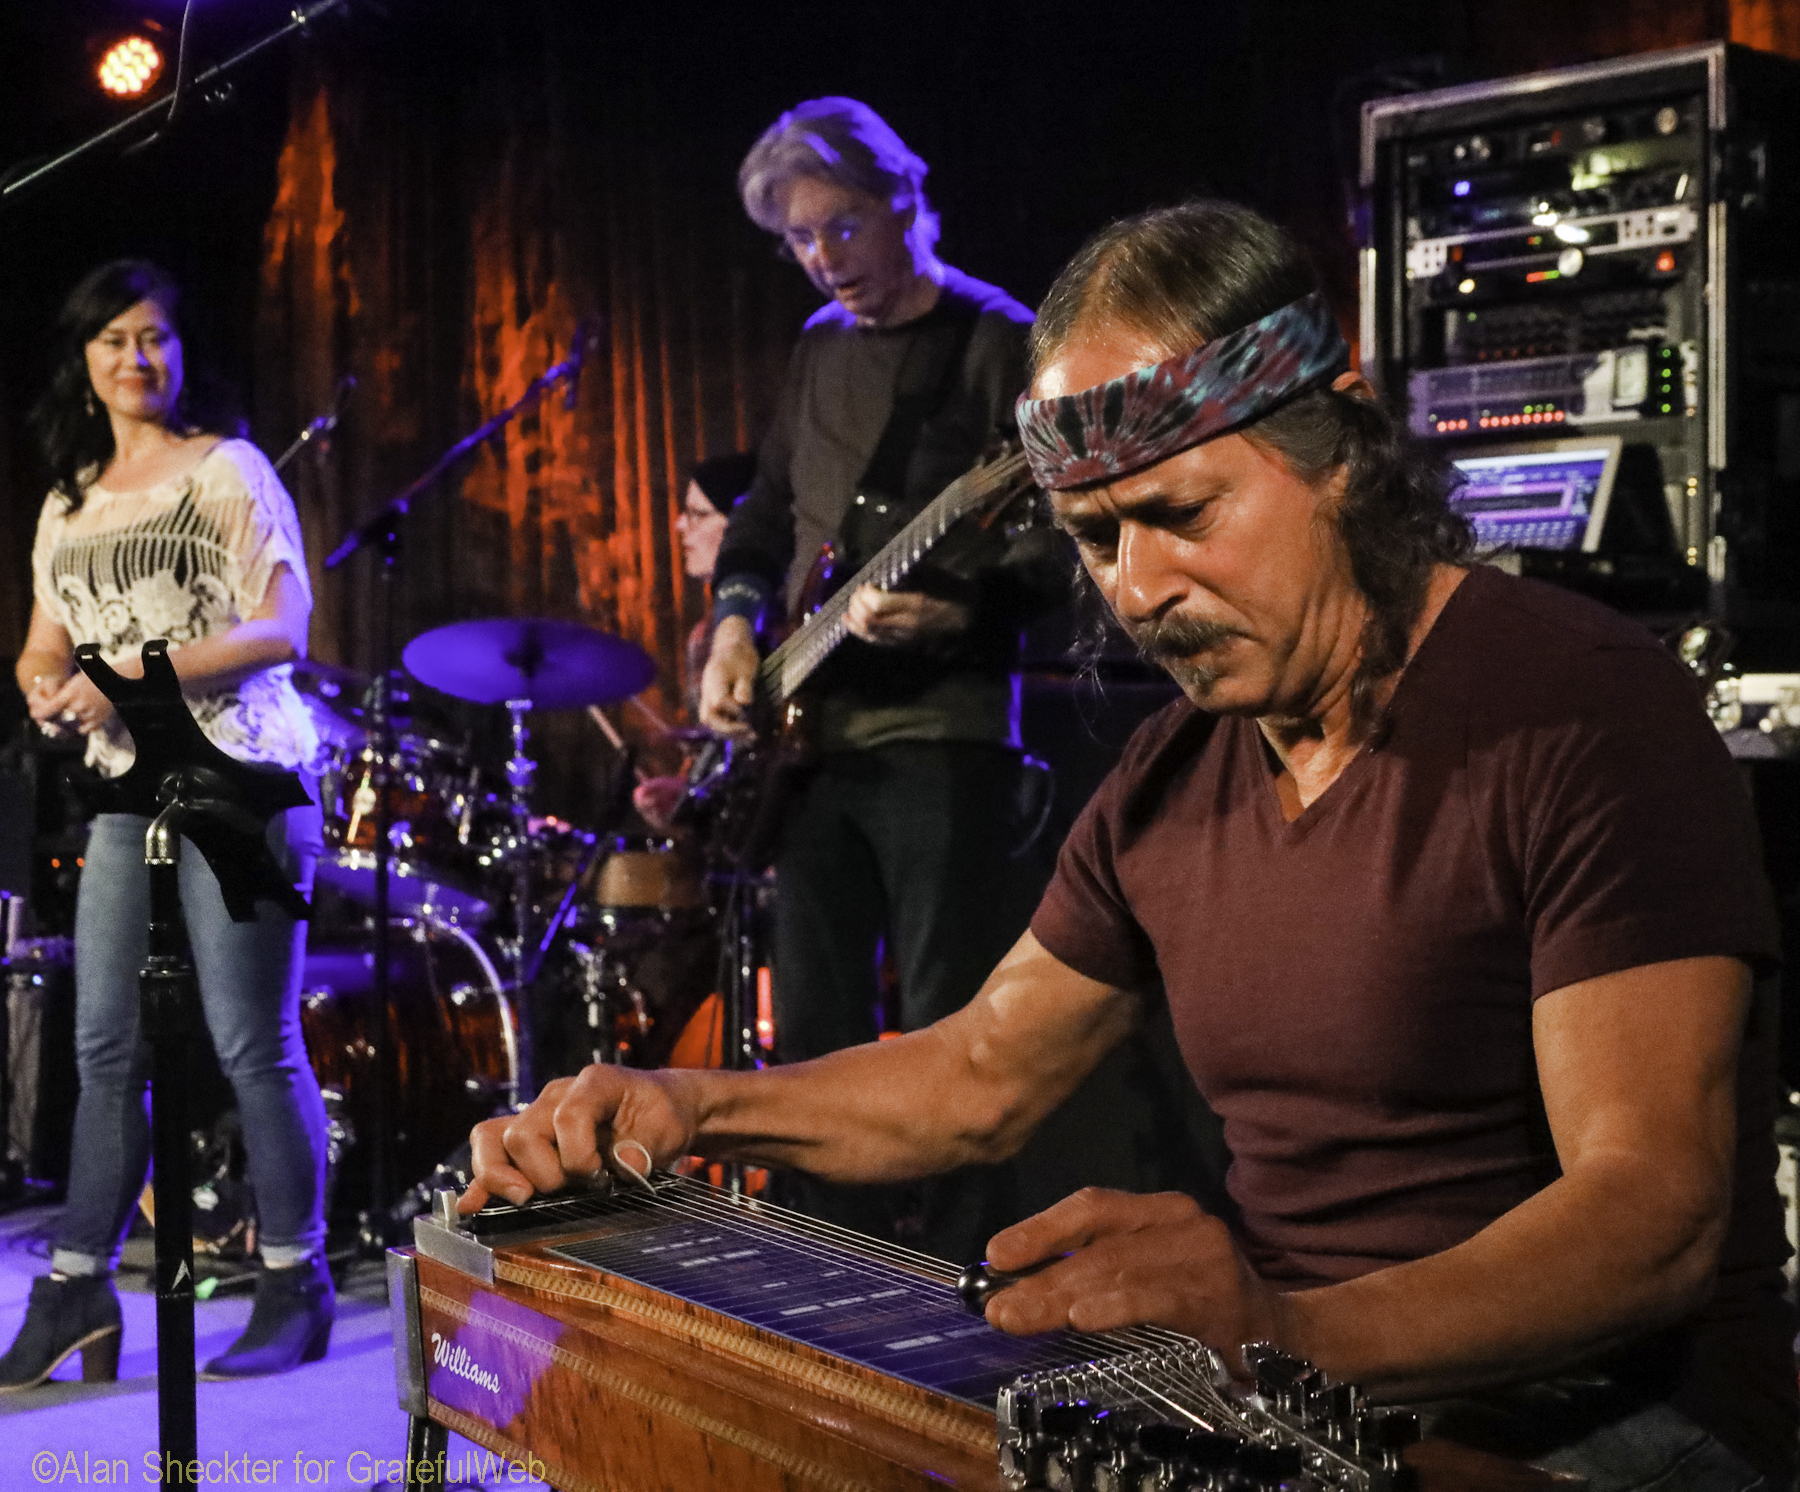 Barry with Phil Lesh & Friends